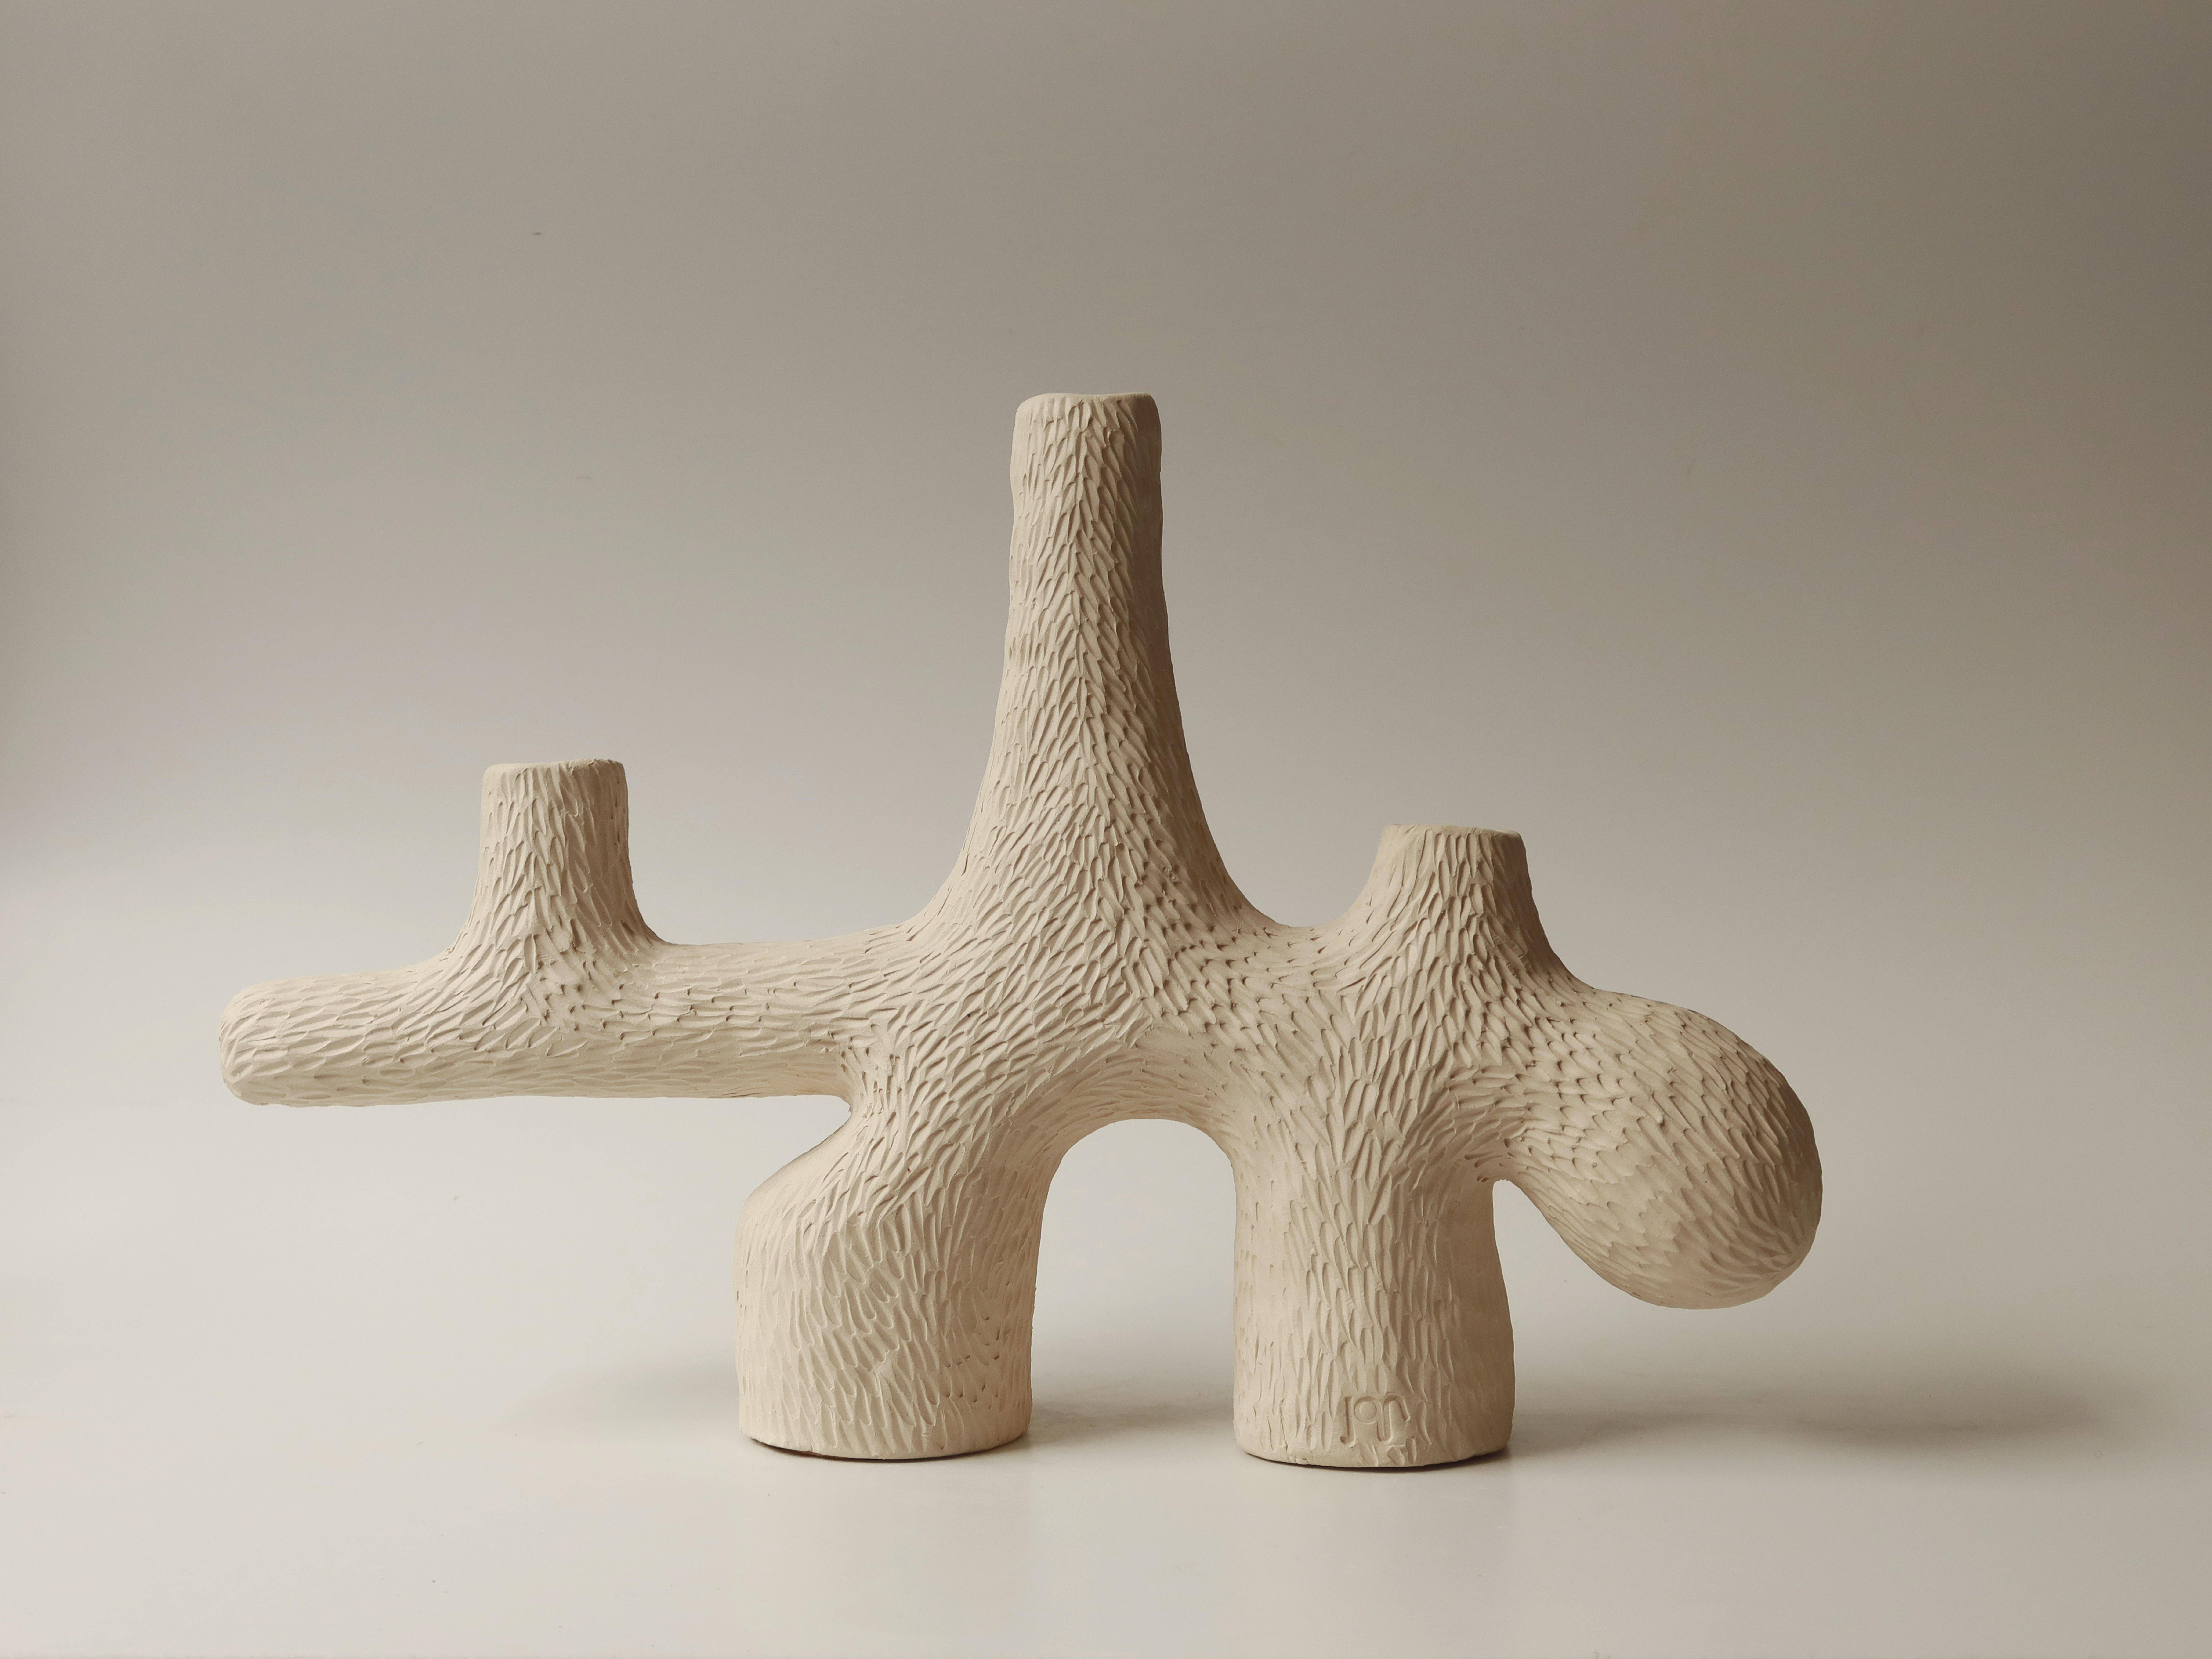 Forest Candelabra no.2 by Jan Ernst
Dimensions: W 30 x D 80 x H 28 cm
Materials: White stoneware, Black clay, Terracotta

Glazed to client specification.


Jan Ernst’s work takes on an experimental approach, as he prefers making bespoke